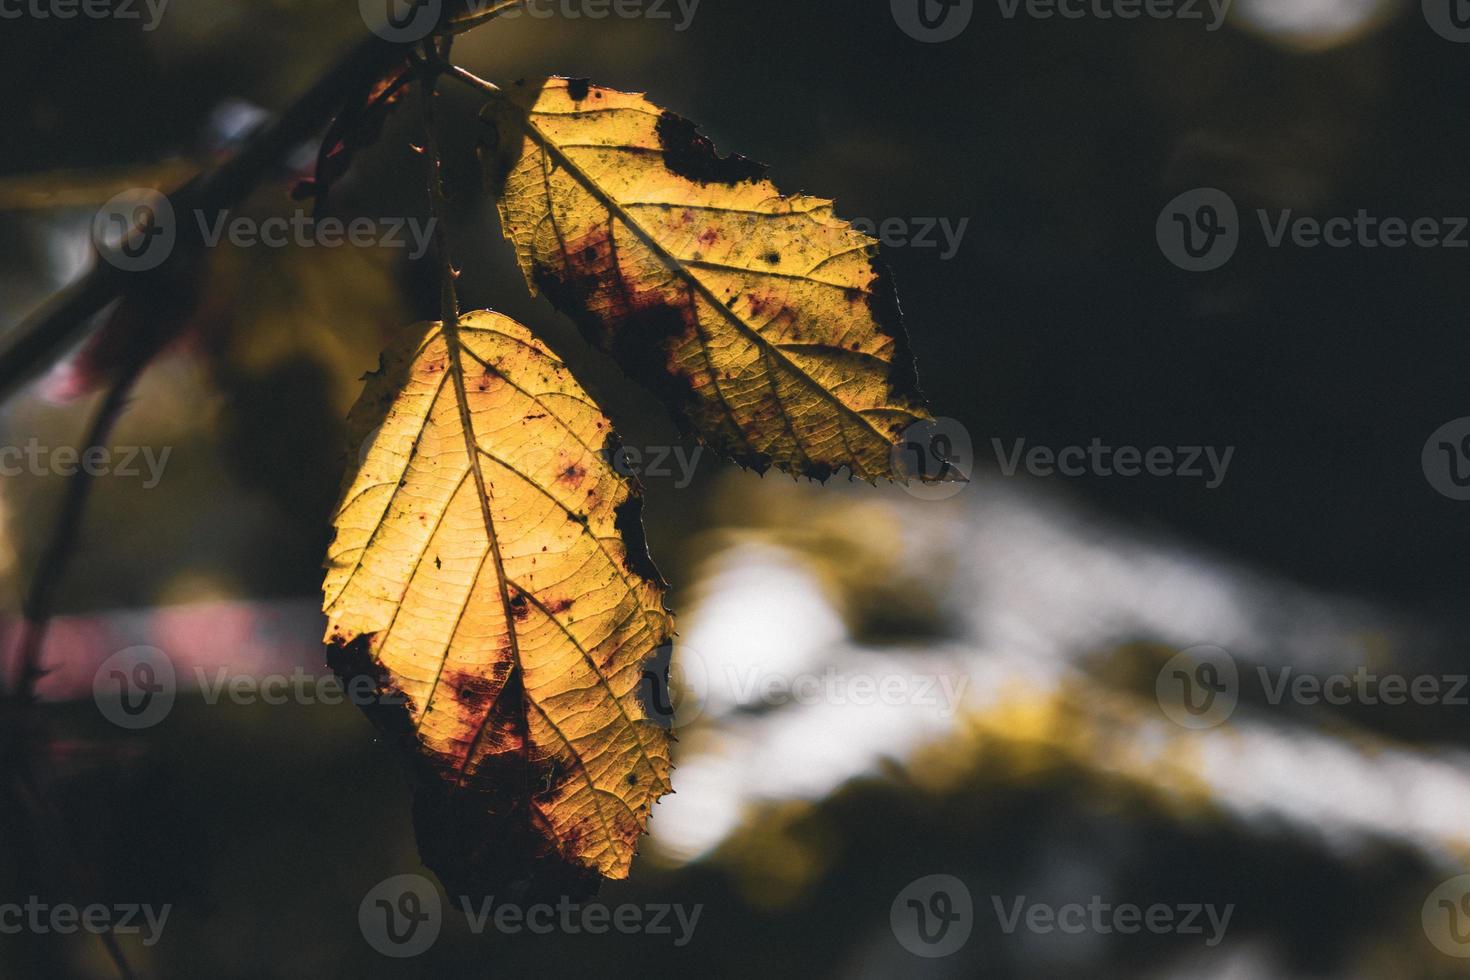 Yellowed decaying dying golden leaf photo